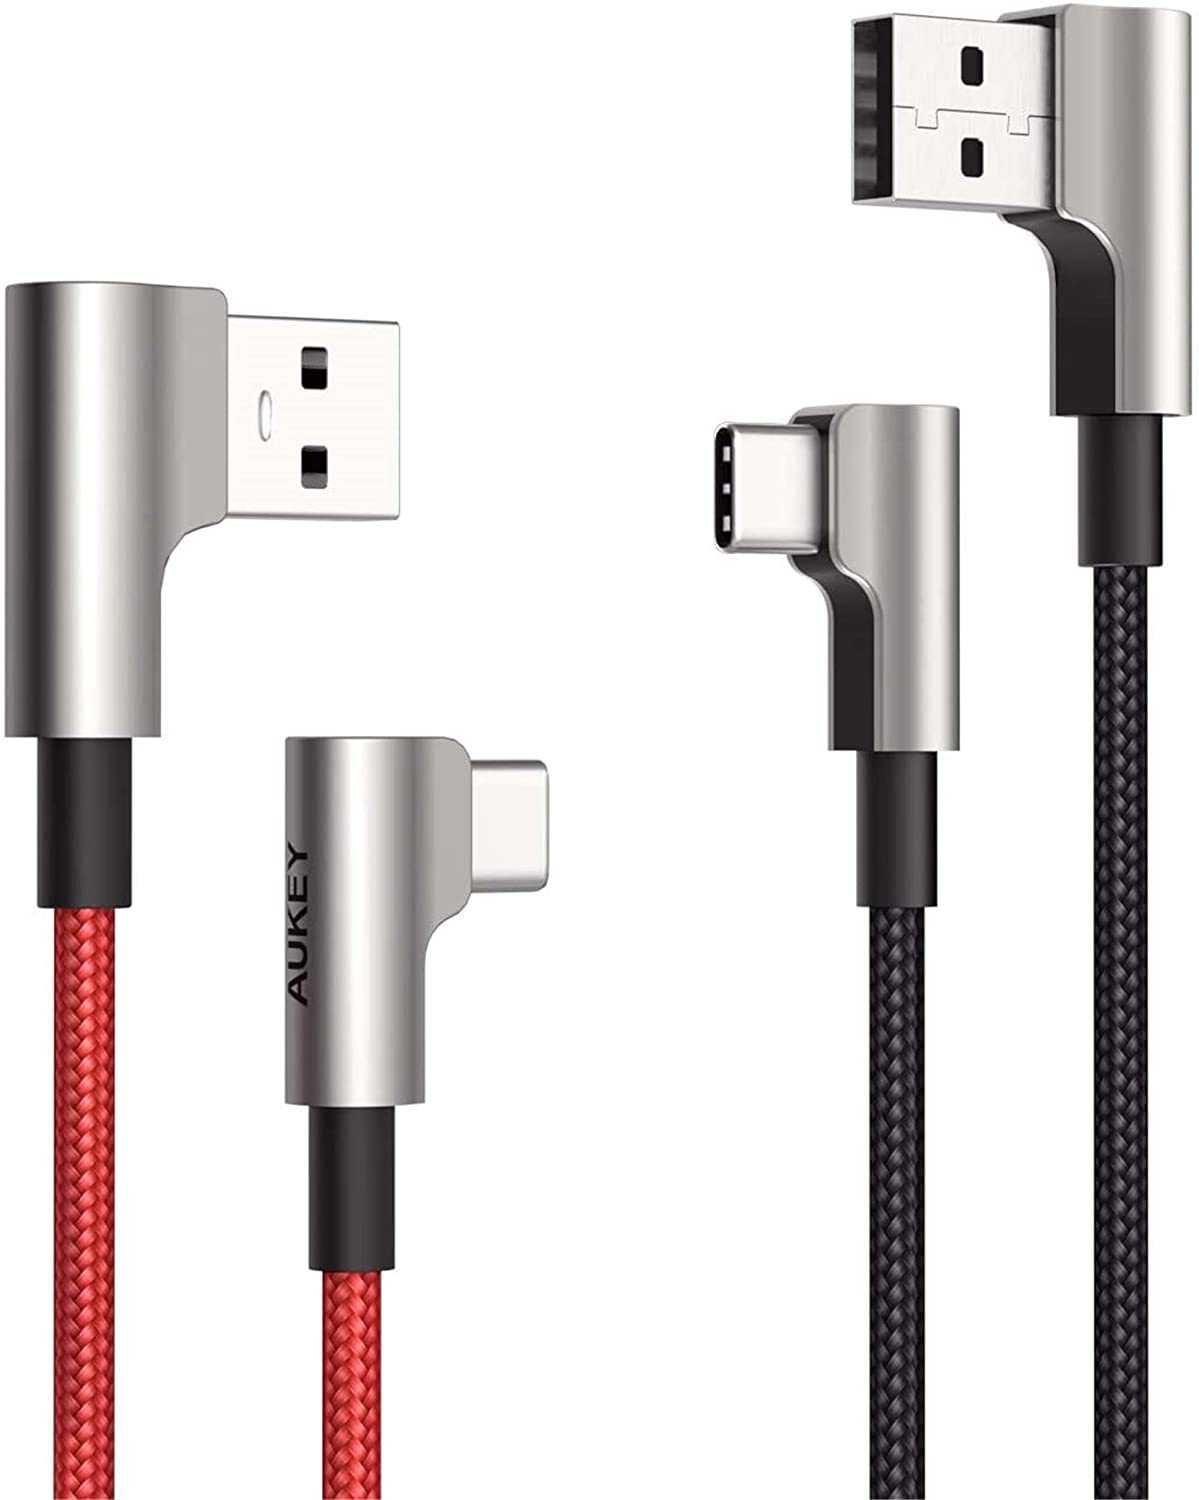 2-Pack of 6.6' Aukey USB C to USB A Right Angle Braided Cable $7.80 at Amazon